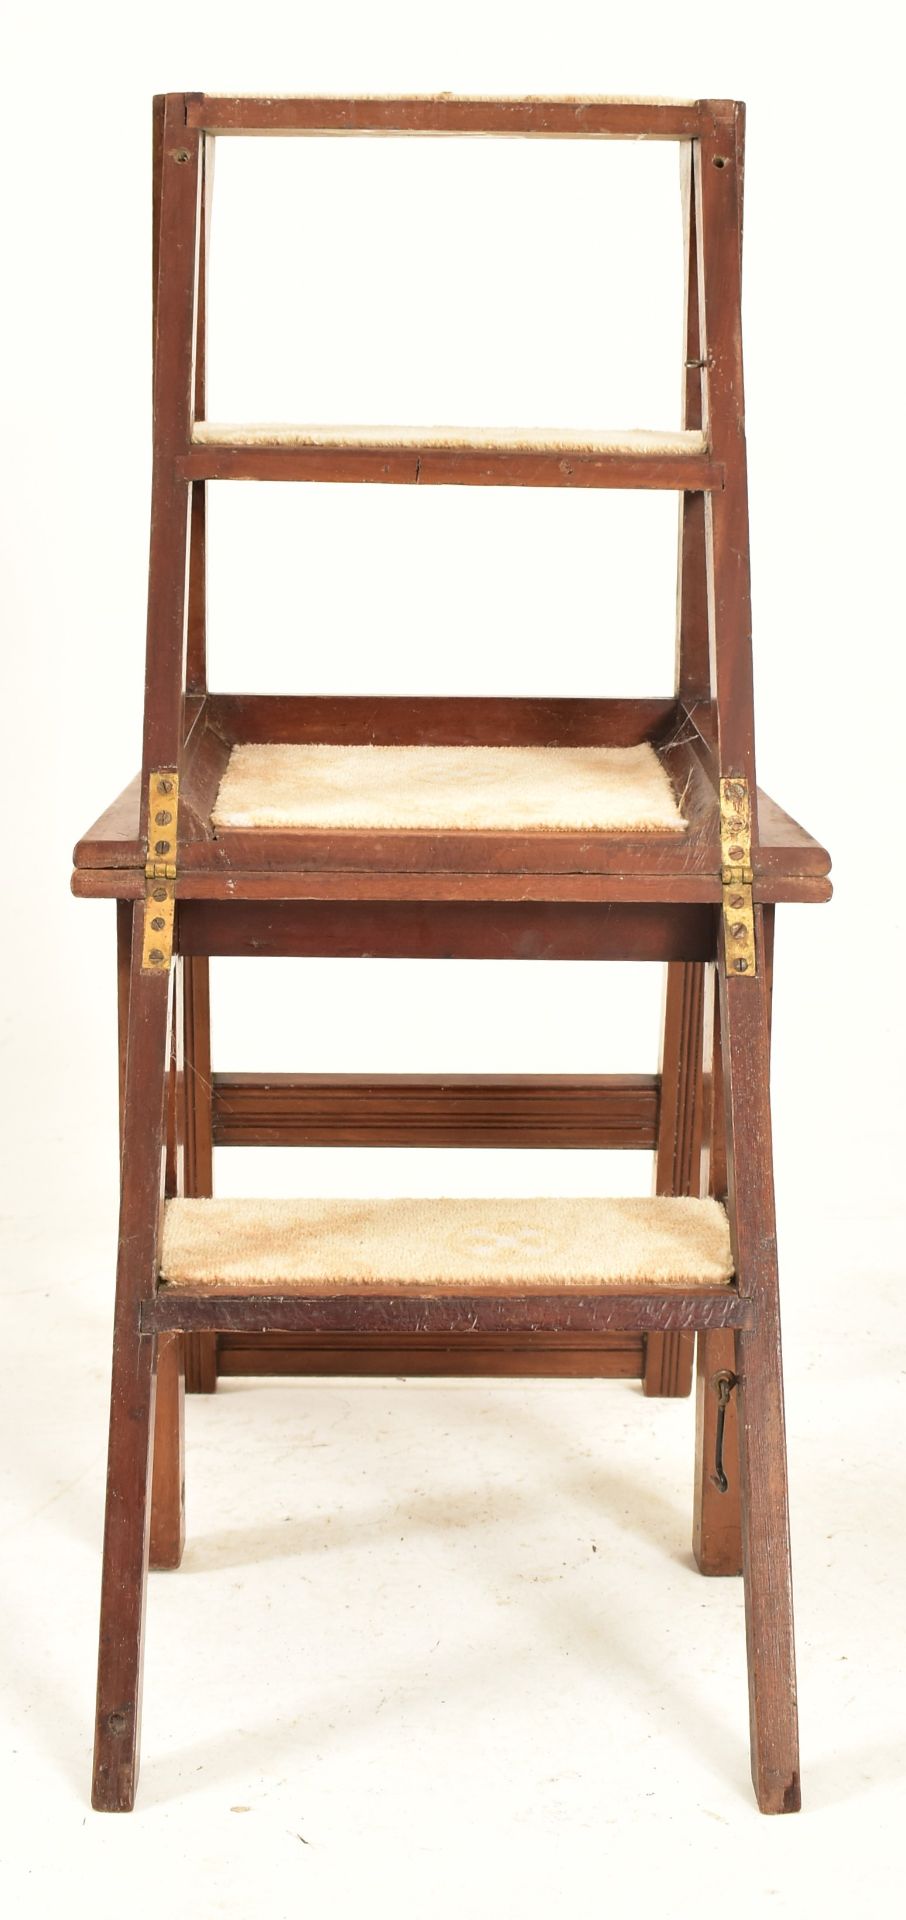 LATE VICTORIAN MAHOGANY METAMORPHIC FOLDING LIBRARY CHAIR - Image 4 of 6